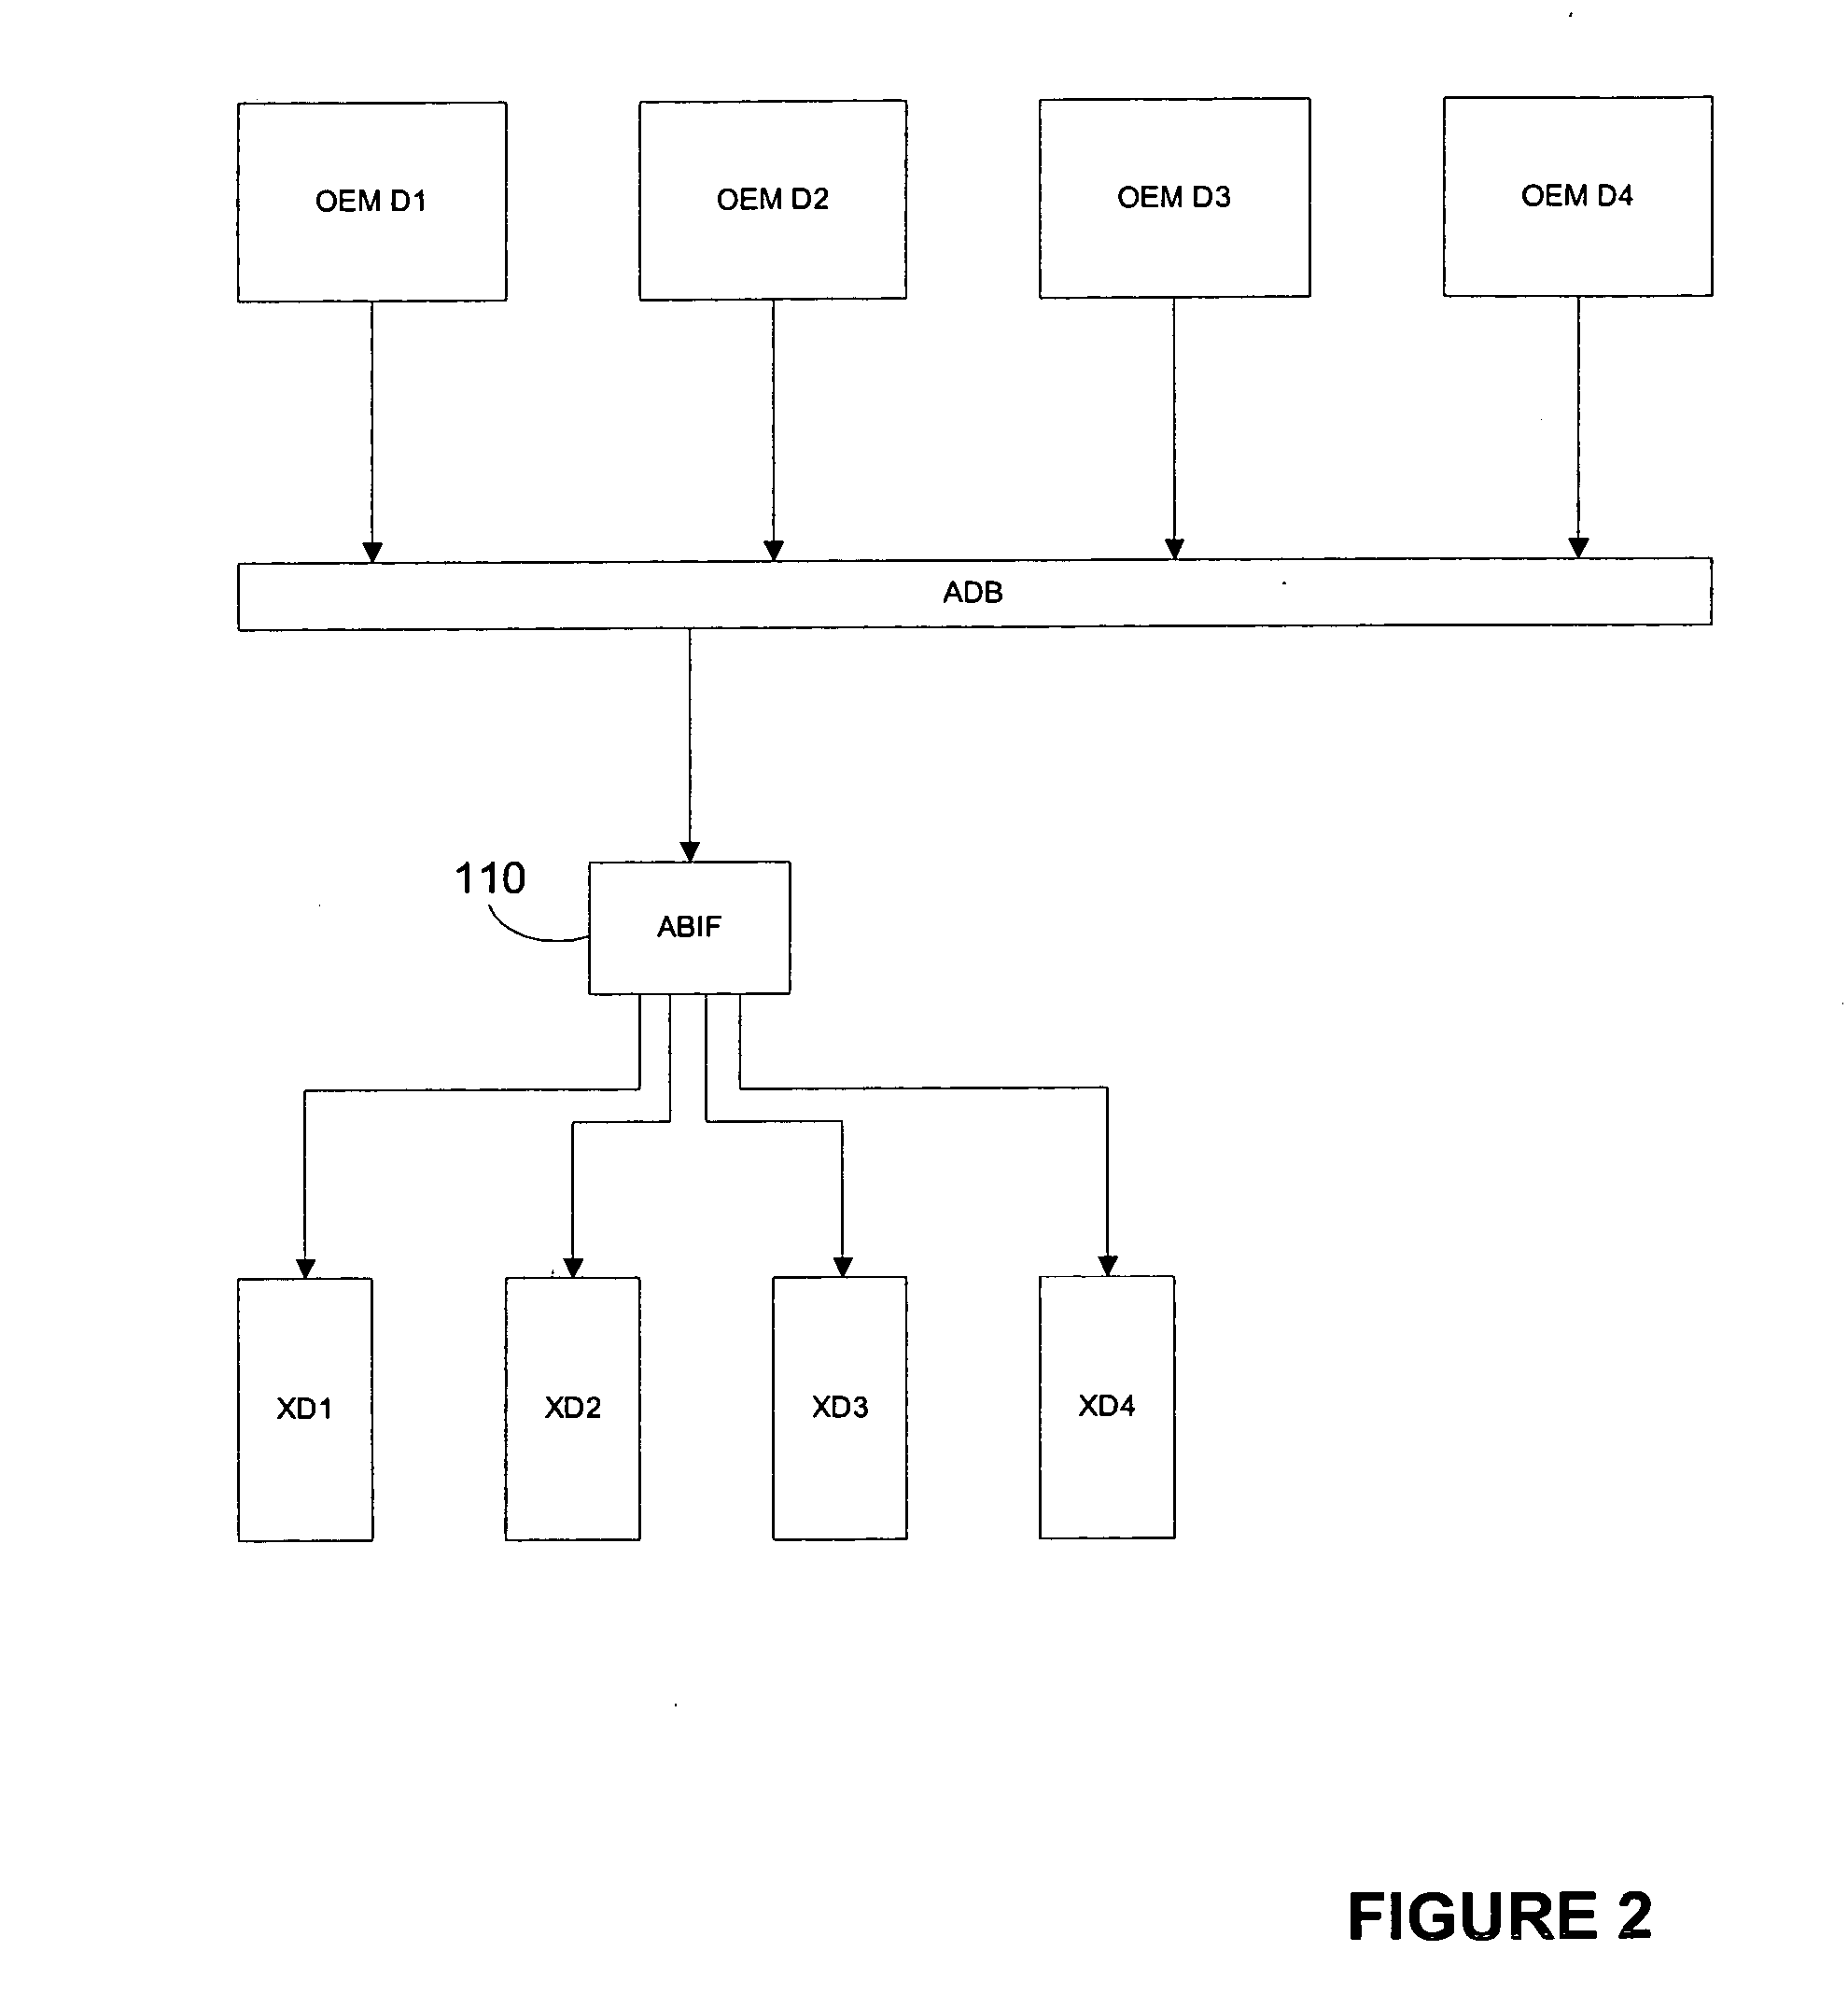 Apparatus and method for manipulating automotive data packets